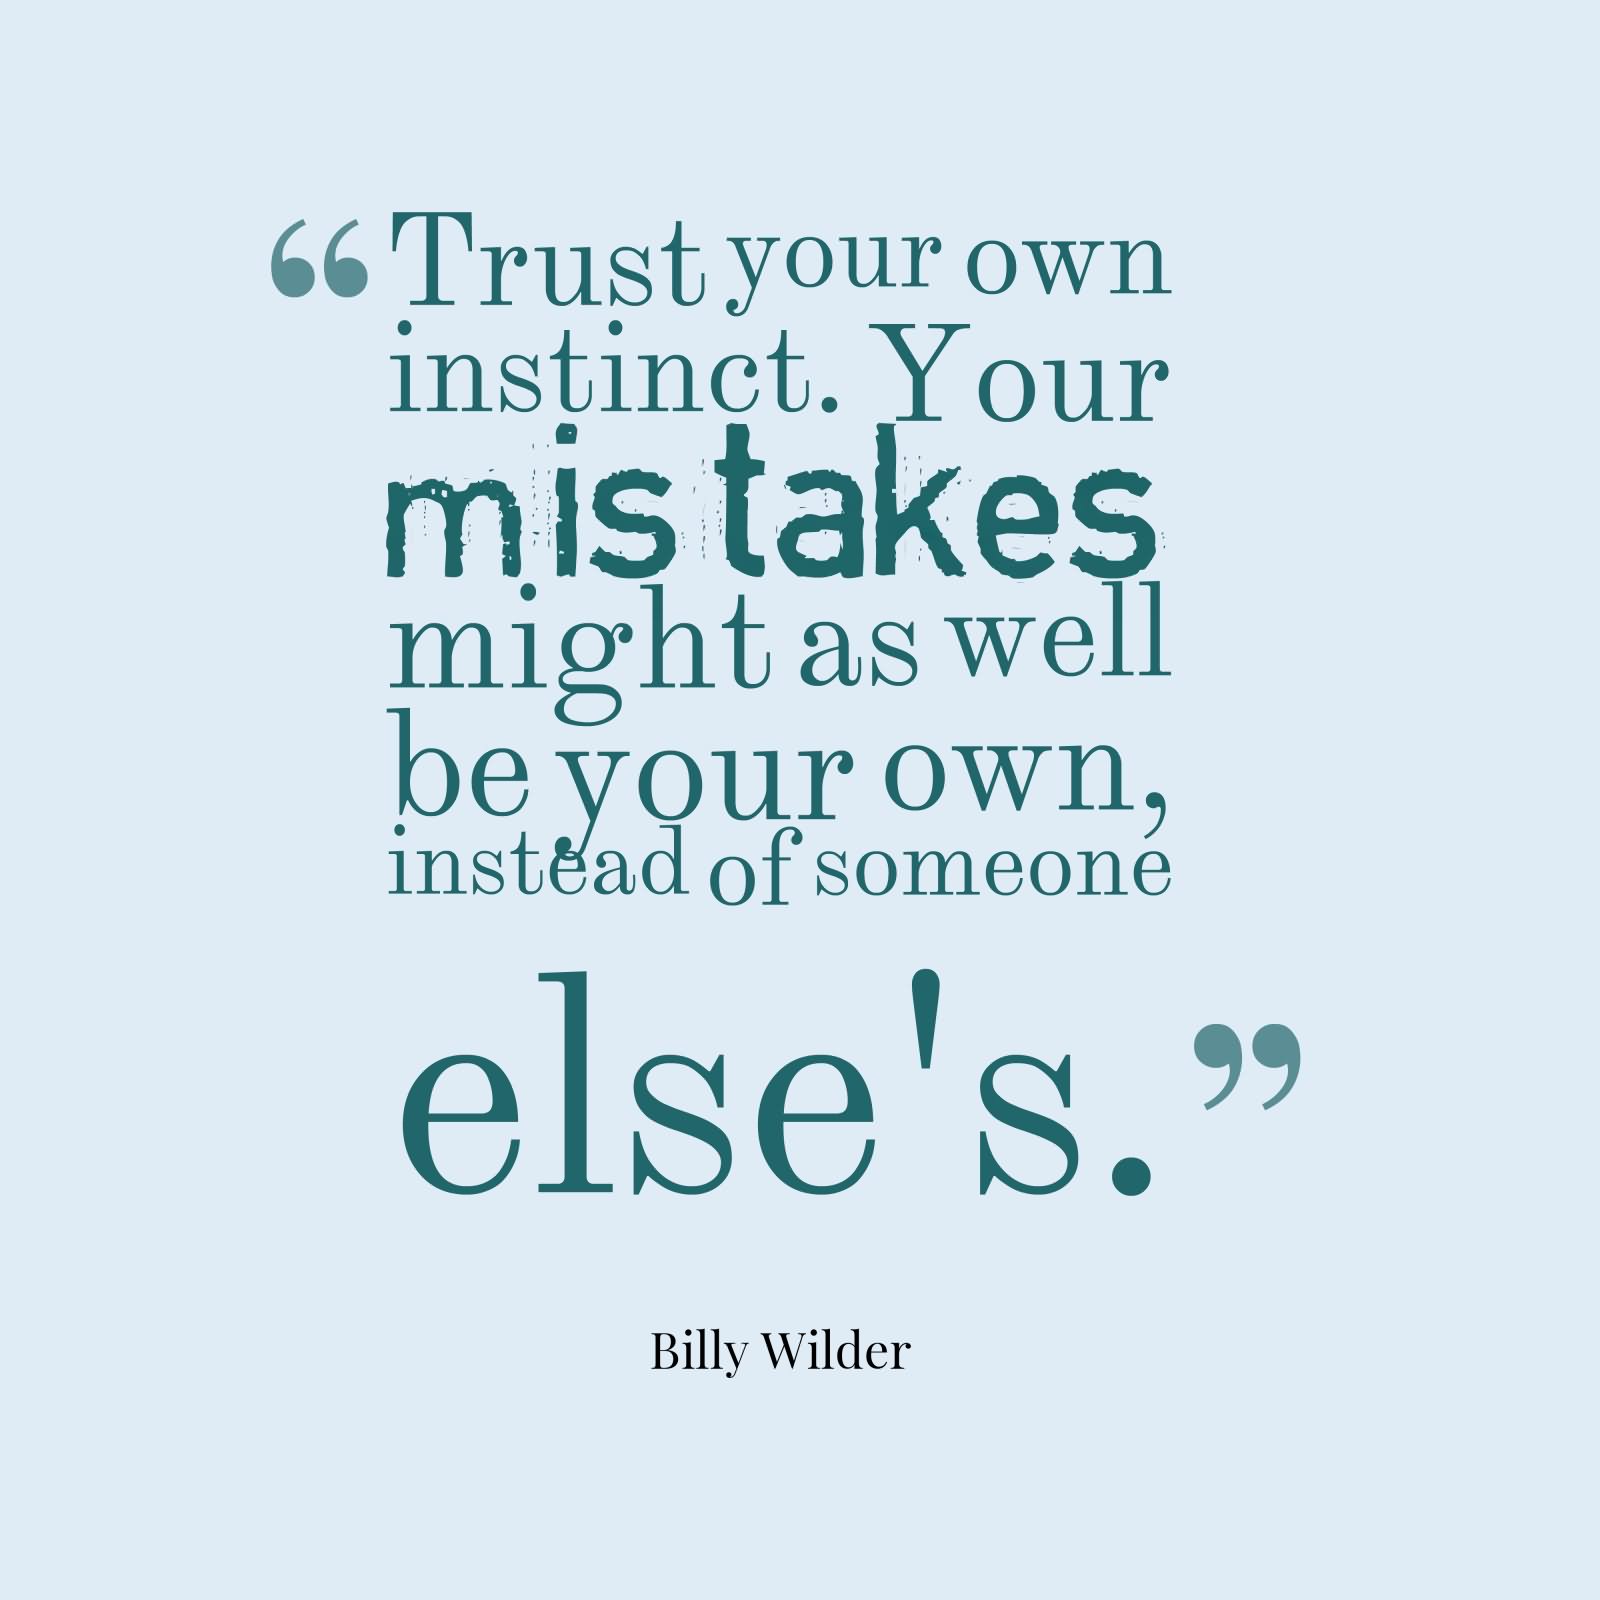 Trust your own instinct. Your mistakes might as well be your own instead of someone else's. -  Billy Wilder.